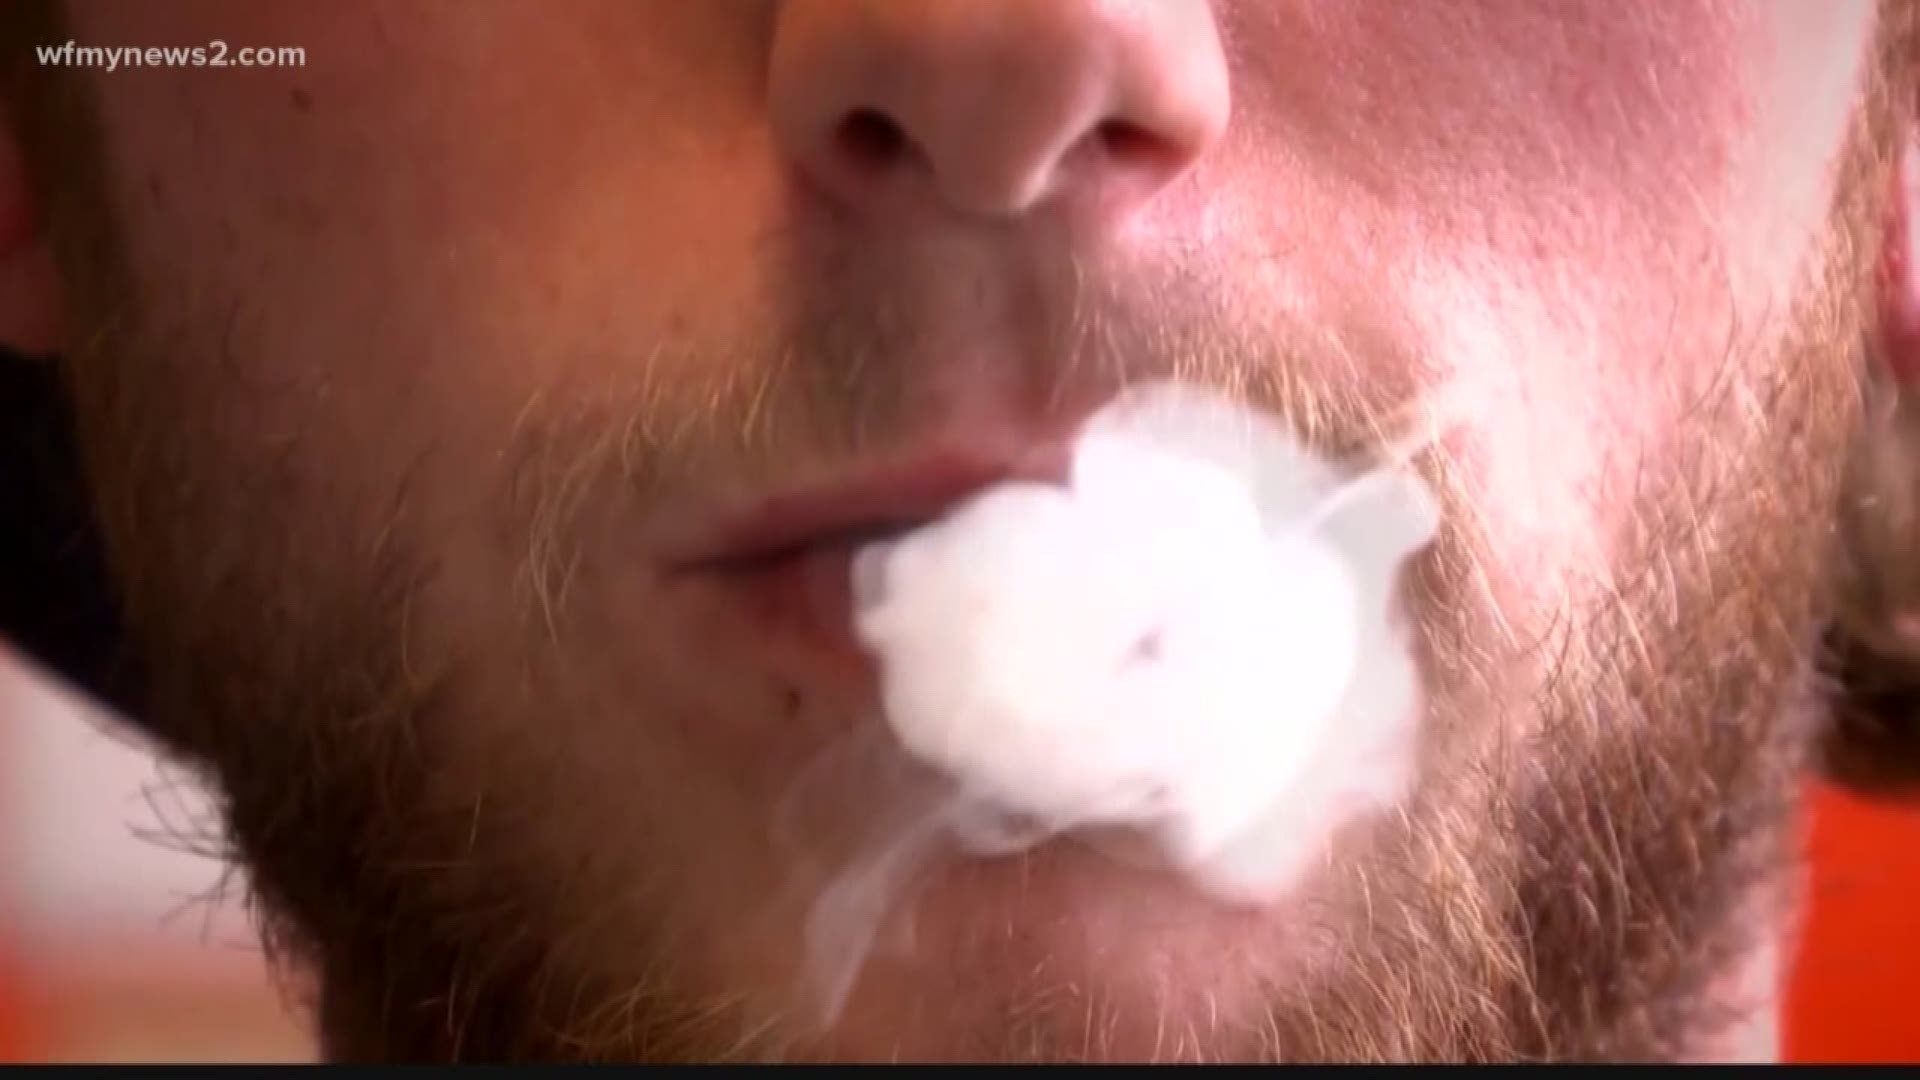 They're urging everyone to stop vaping because health officials haven't pin pointed exactly what's causing the serious health problems.